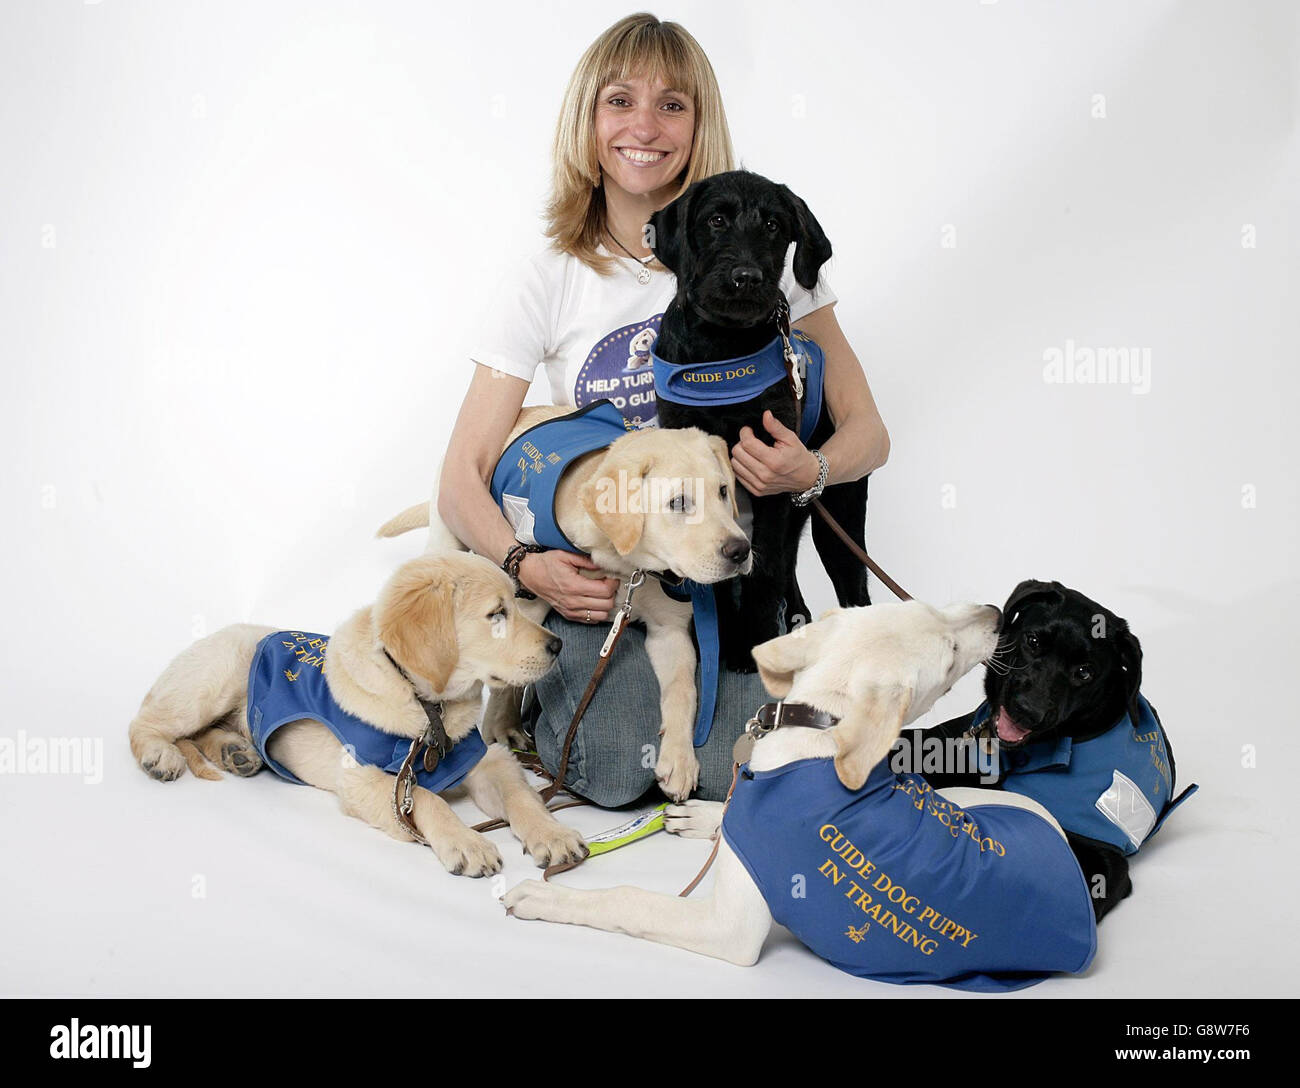 Michaela Strachan celebrates the launch of a new Andrex sponsored campaign to turn more puppies into guide-dogs by means of an on-pack toilet tissue promotion, in partnership with The Guide Dogs for the Blind Association and The Irish Guide Dogs for the Blind, central London, Tuesday 27 September 2005. PRESS ASSOCIATION Photo. Photo credit should read: Edmond Terakopian / PA Stock Photo